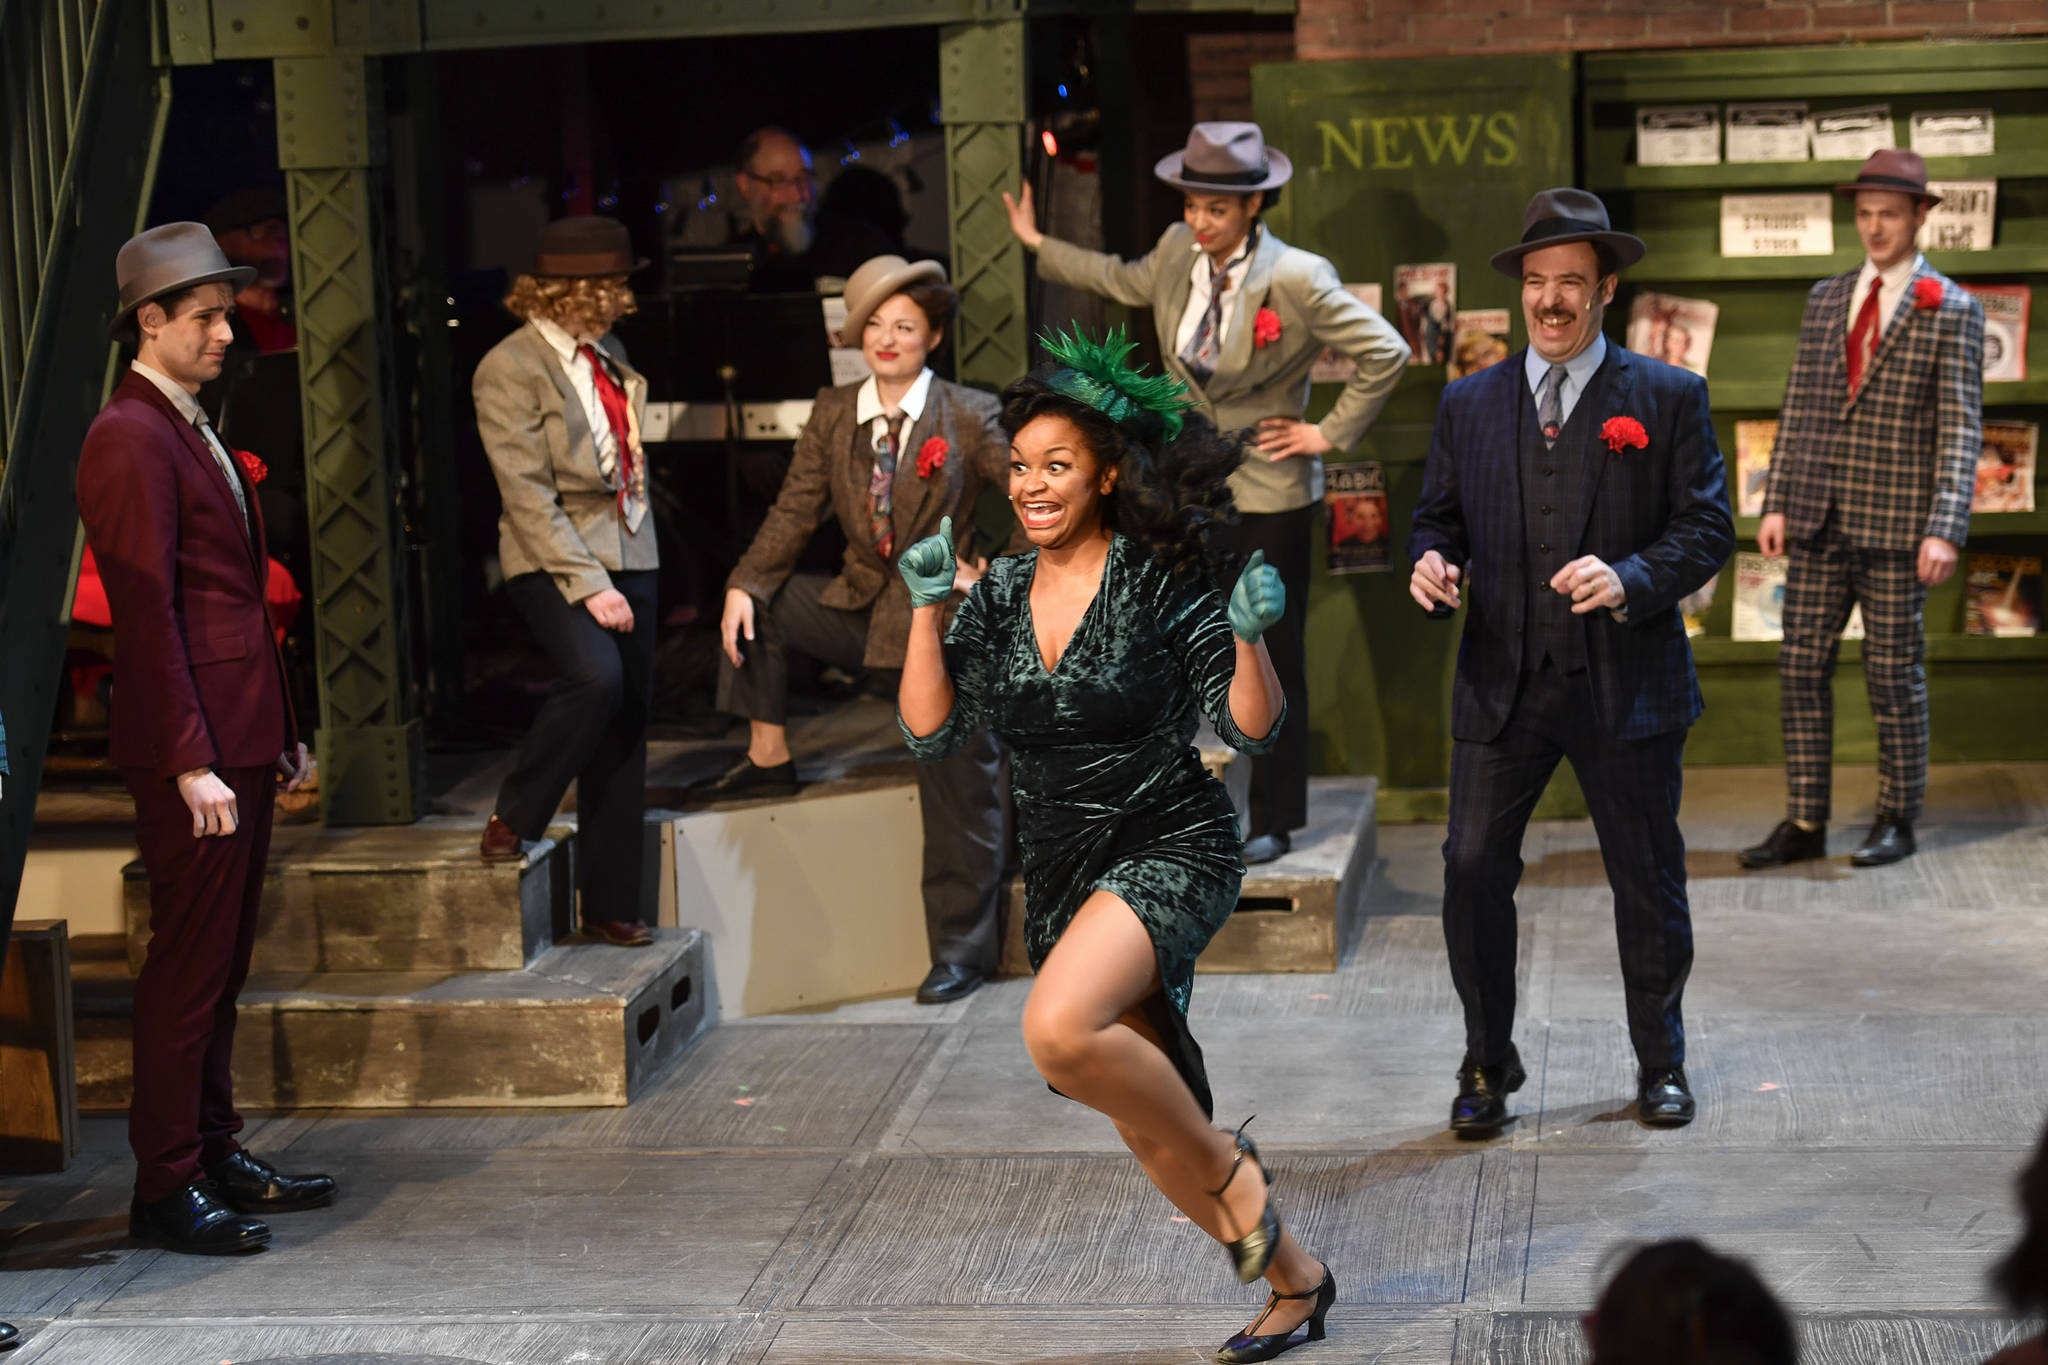 Opinion: Standing ovation for Perseverance’s ‘Guys and Dolls’